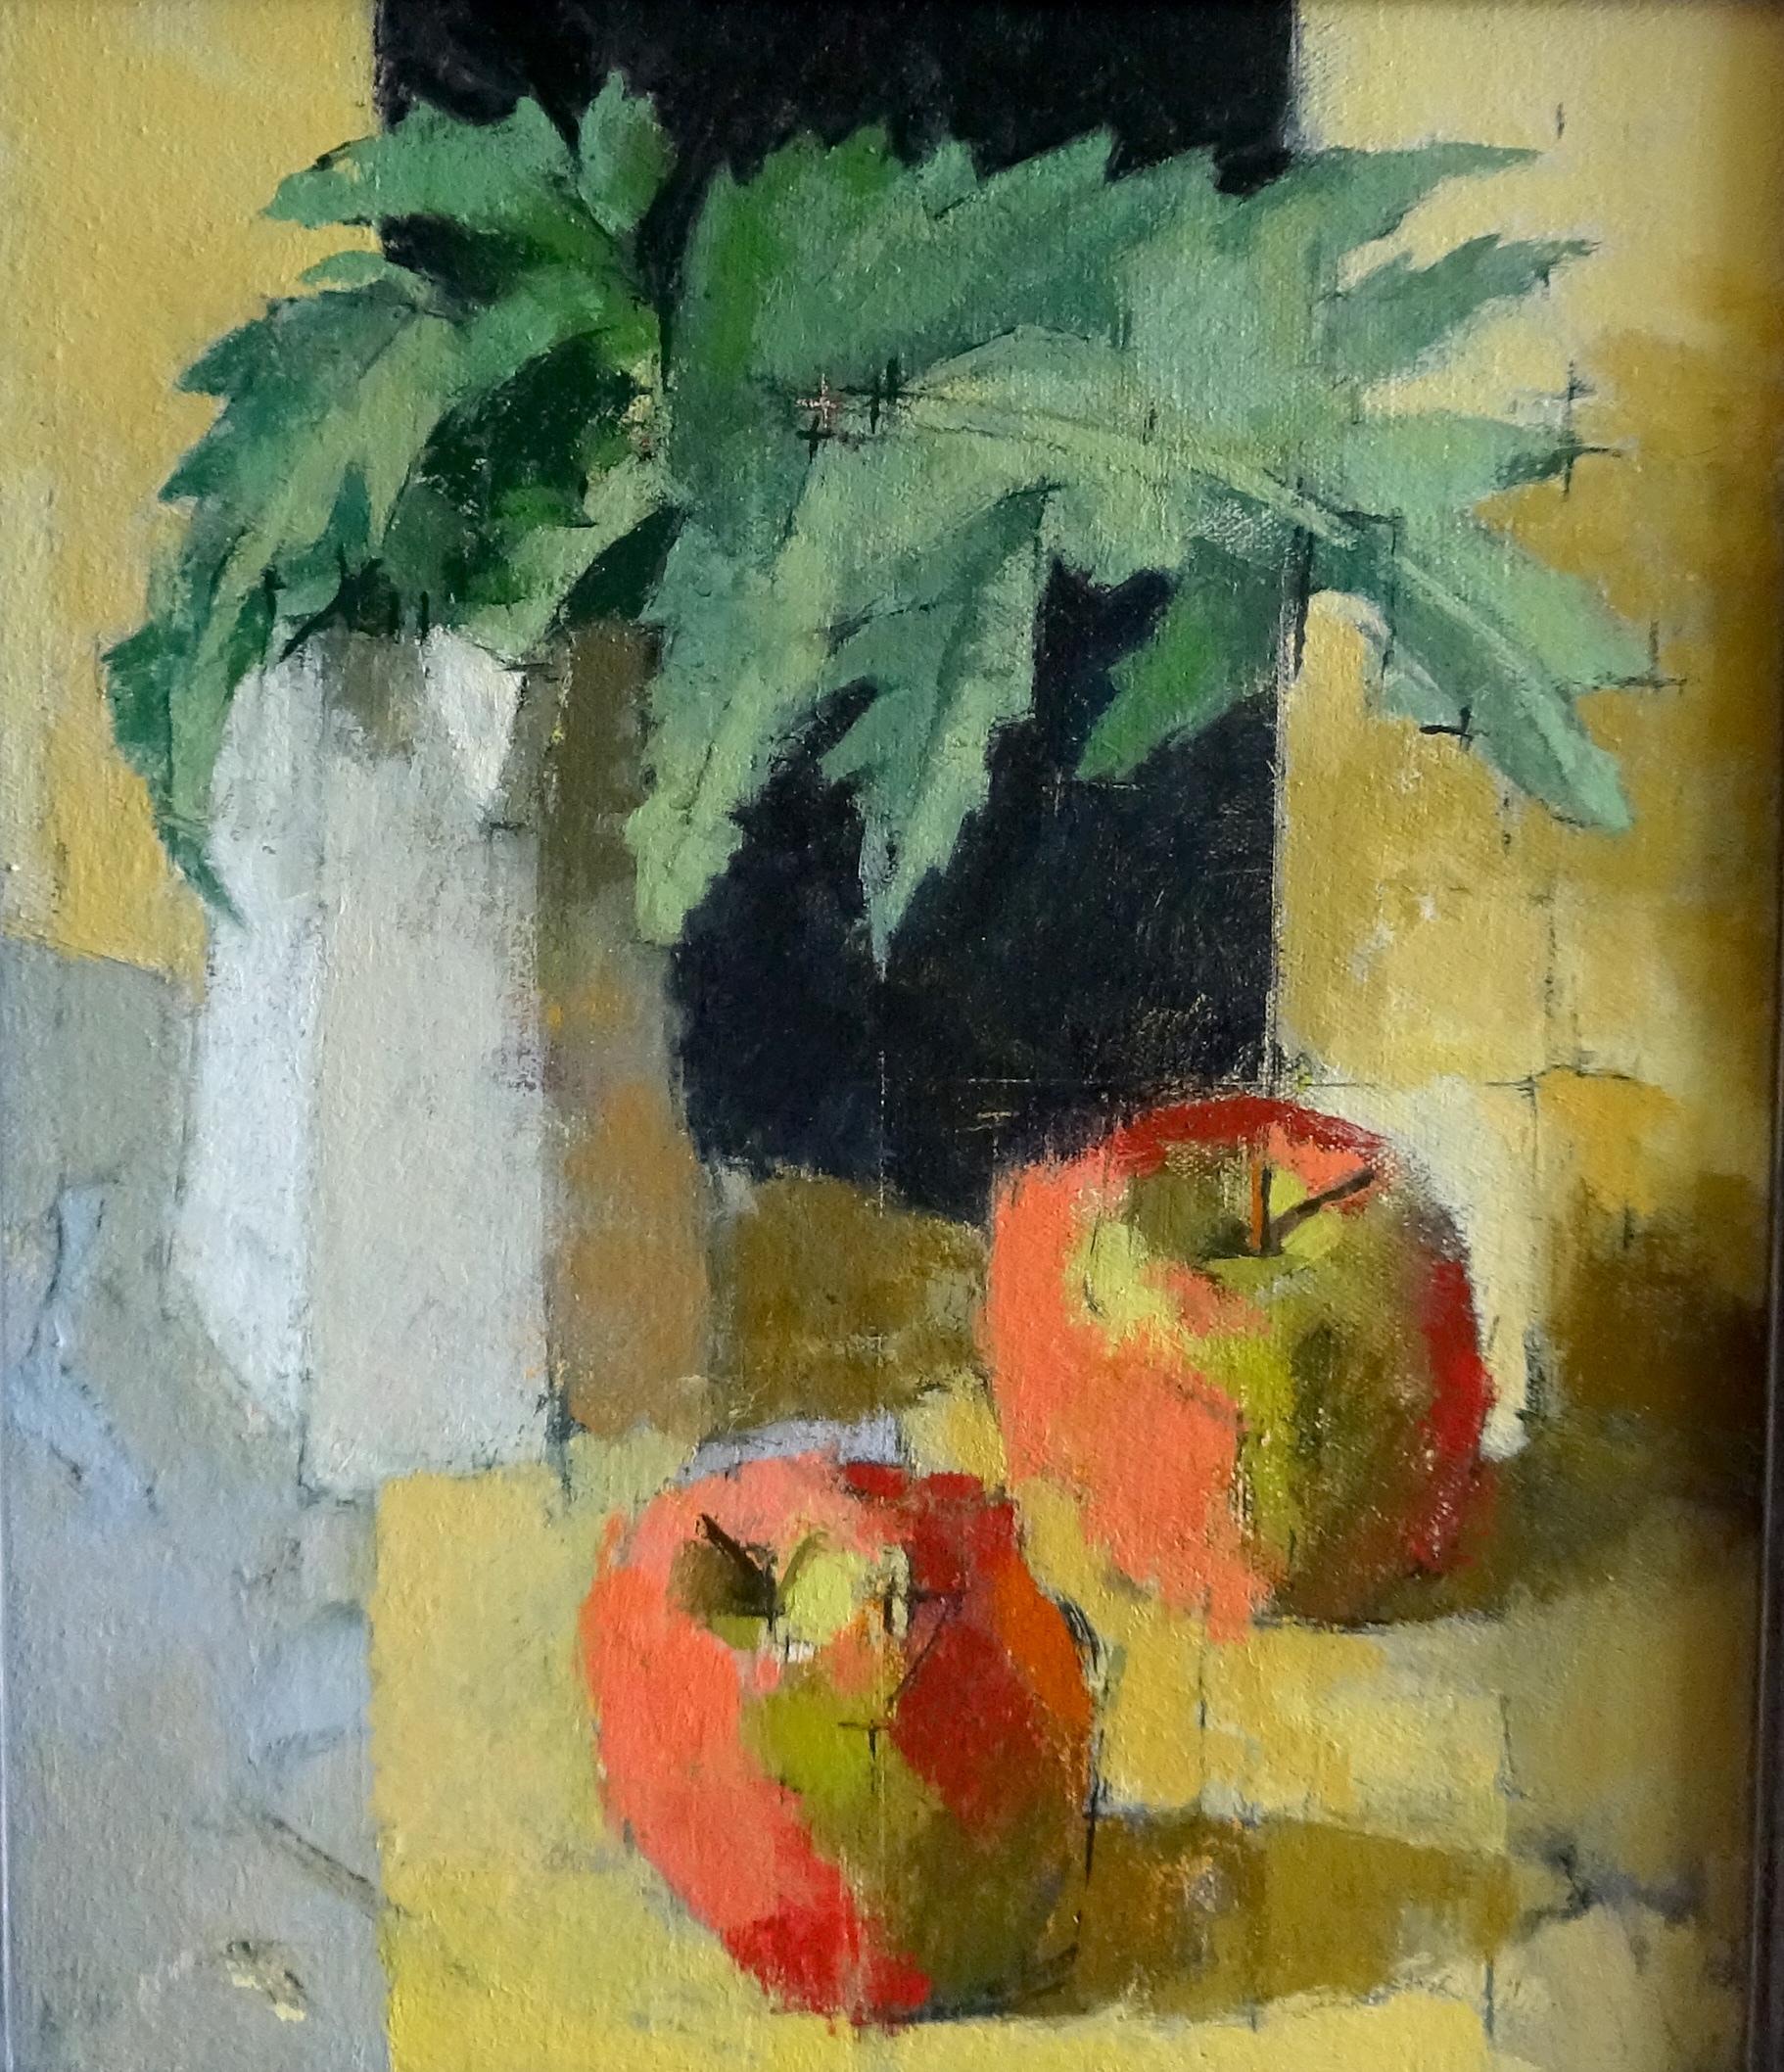 Jill Barthorpe Landscape Painting - "Two Red Apples" Contemporary Still Life Oil Painting